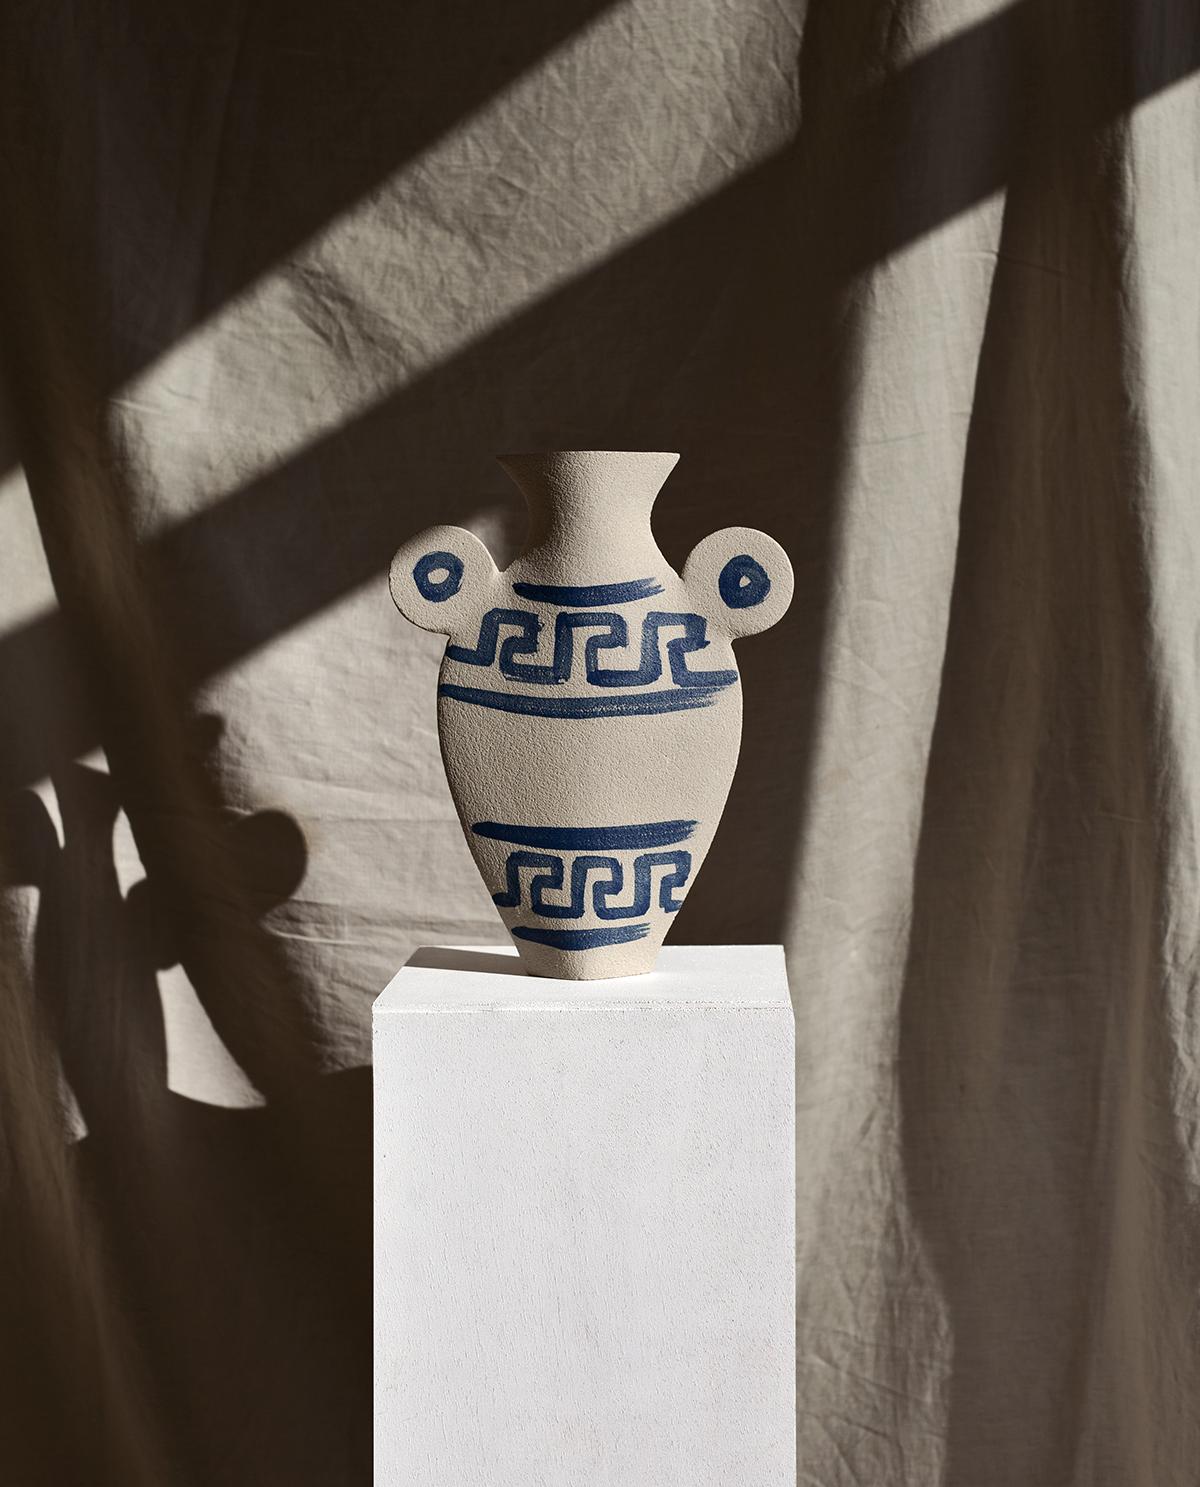 Contemporary 21st Century ‘Greek [L]’, in White Ceramic, Hand-Crafted in France For Sale